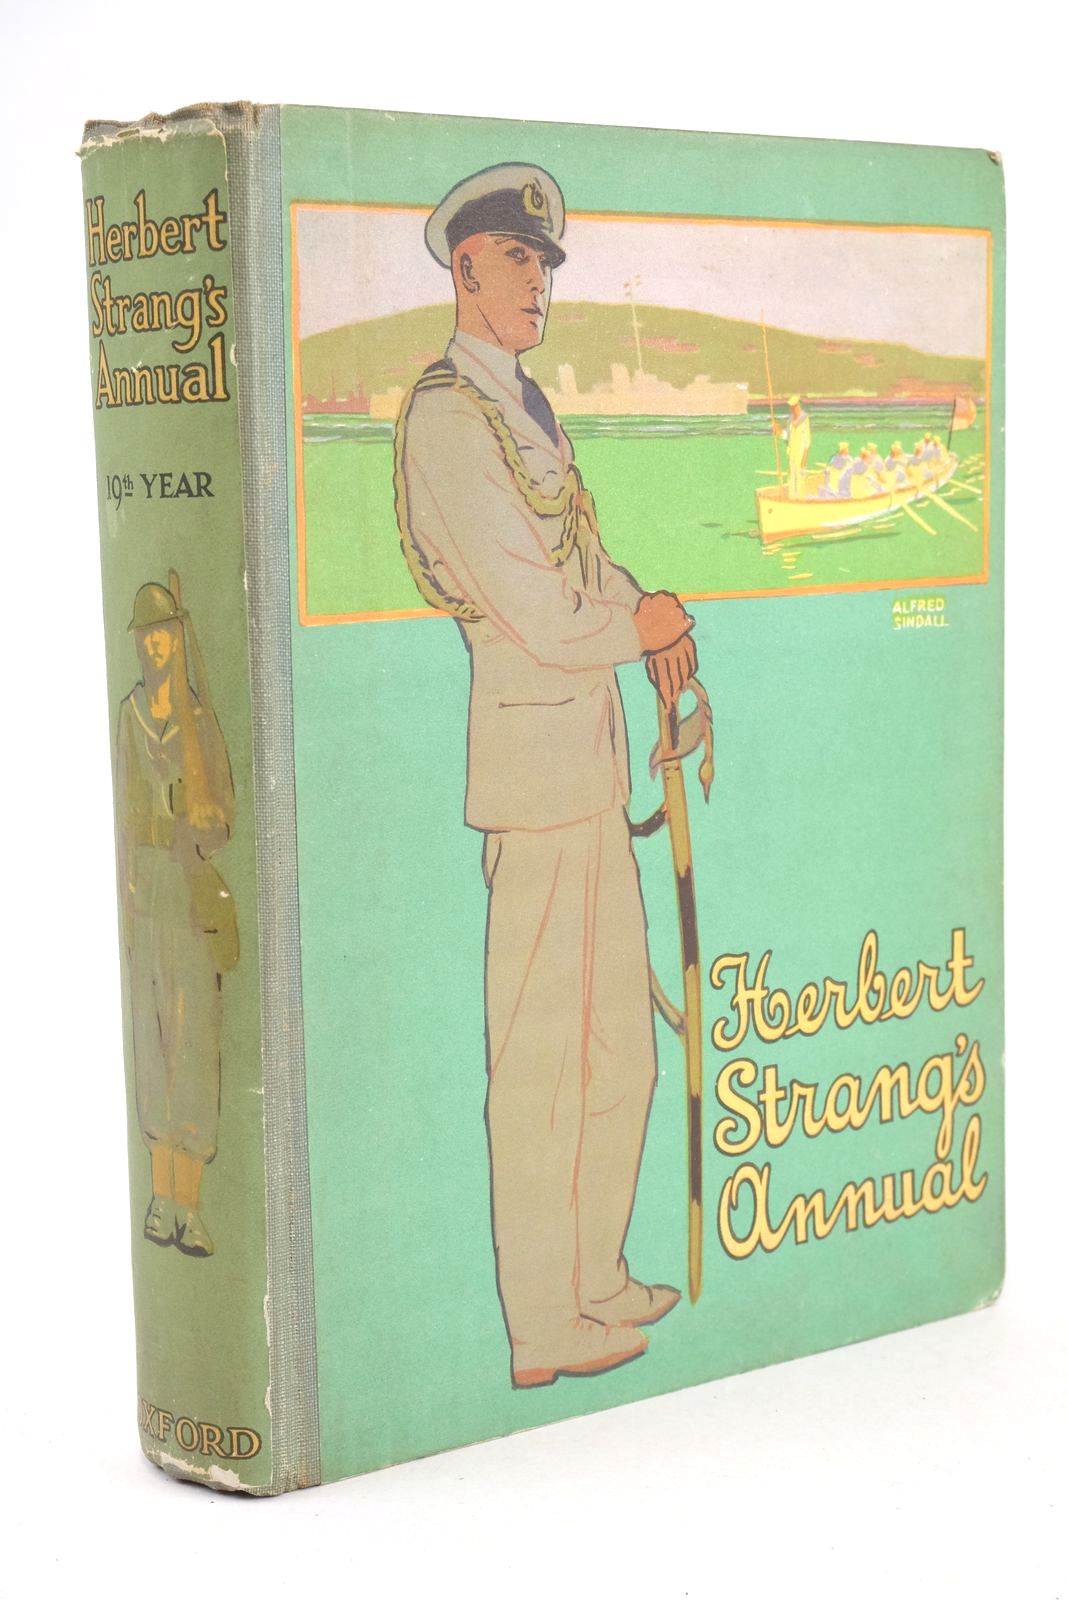 Photo of HERBERT STRANG'S ANNUAL 19TH YEAR written by Strang, Herbert Mason, Charles Hadath, Gunby Brightwell, L.R. Turley, Charles Gorman, Major J.T. et al, illustrated by Sindall, Alfred Brock, C.E. Foster, Marcia Lane Silas, Ellis M'Cannell, Otway et al., published by Oxford University Press, Humphrey Milford (STOCK CODE: 1325686)  for sale by Stella & Rose's Books